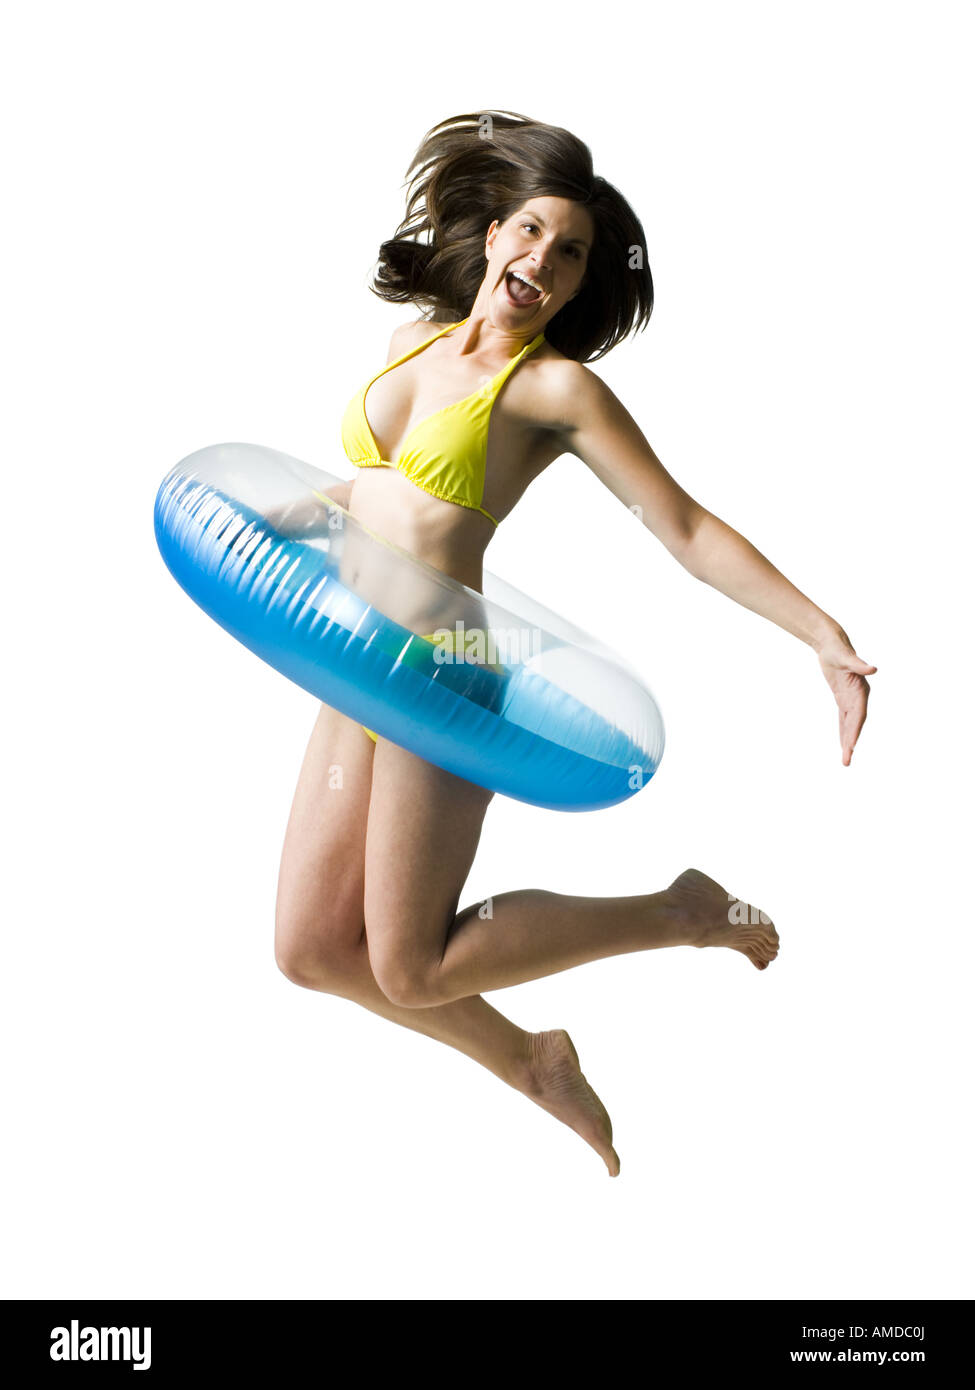 Woman in bikini with swimming ring around waist jumping and smiling Stock Photo